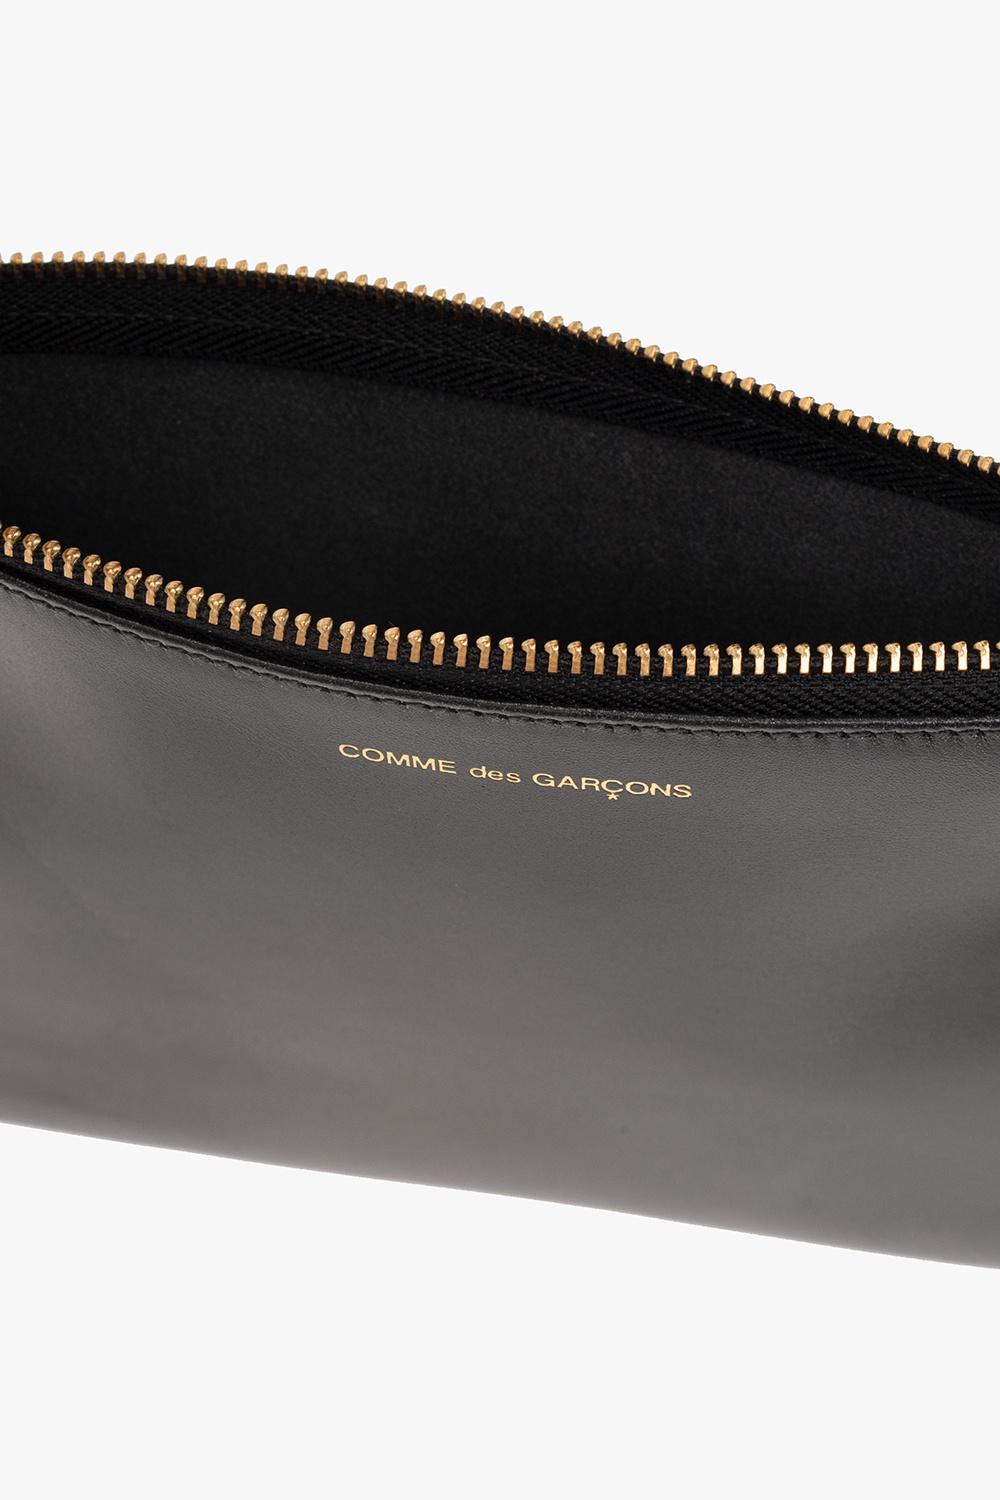 Comme des Garçons Leather Pouch With Logo in Black | Lyst UK